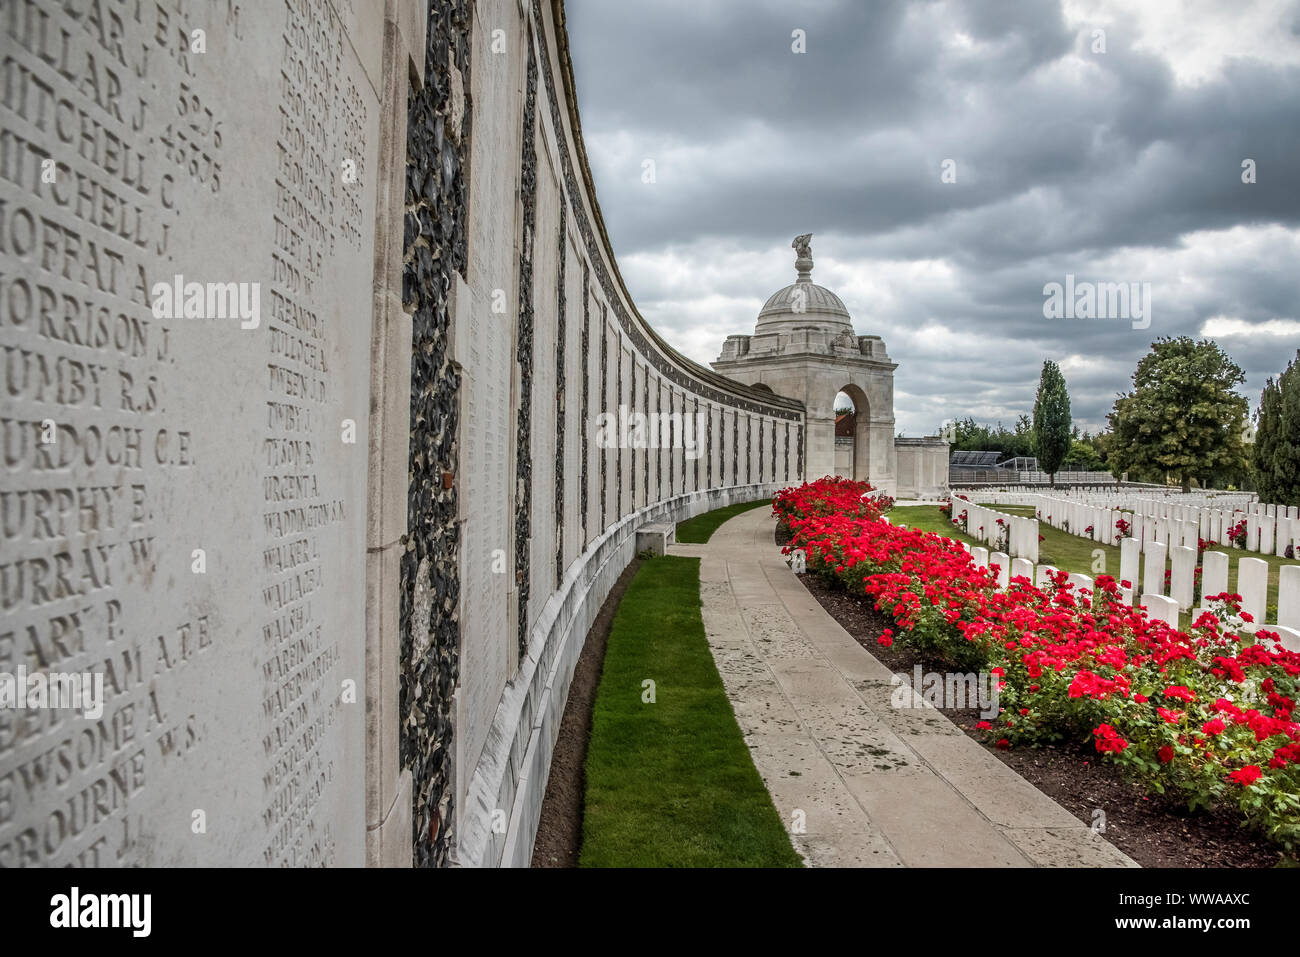 Tyne Cot Cemetery & Memorial, the worlds largest military cemetery at Zonnebeke, near the city of Ypres in West Flanders on the Belgium Salient Stock Photo